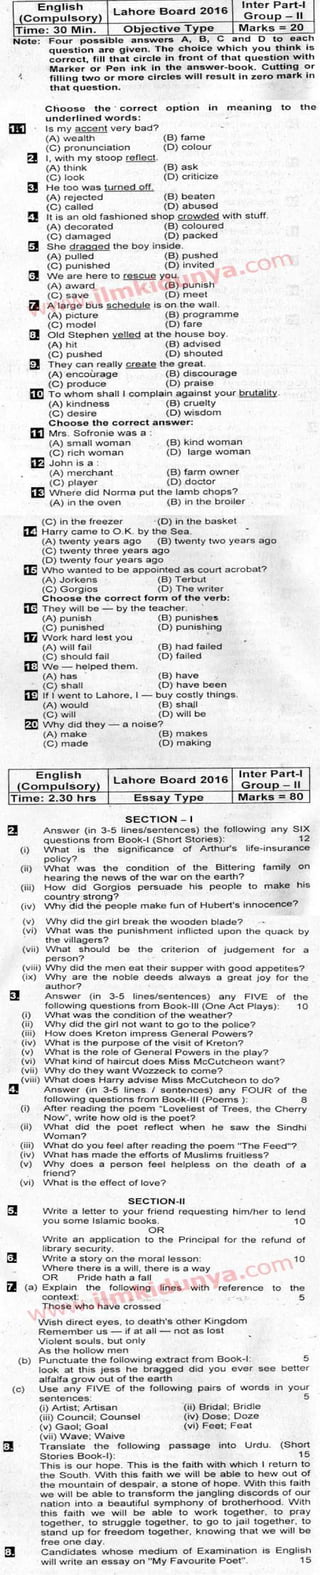 Past papers lahore board 2016 inter part 1 english group 2